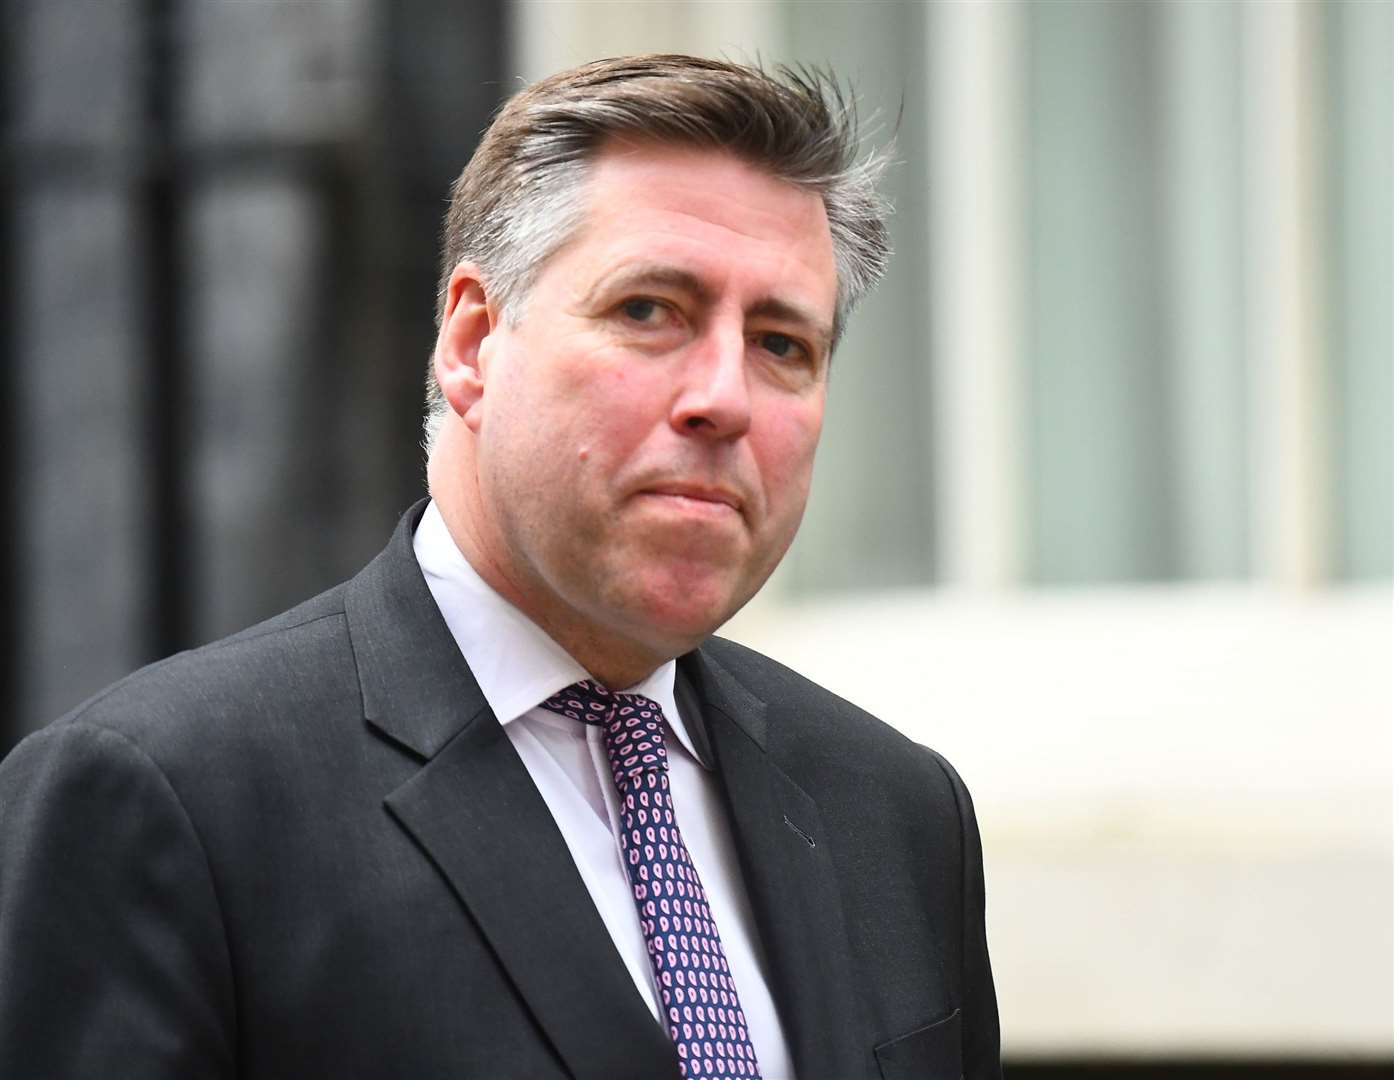 Sir Graham Brady, chairman of the 1922 Committee of Tory backbenchers. Picture: Victoria Jones/PA